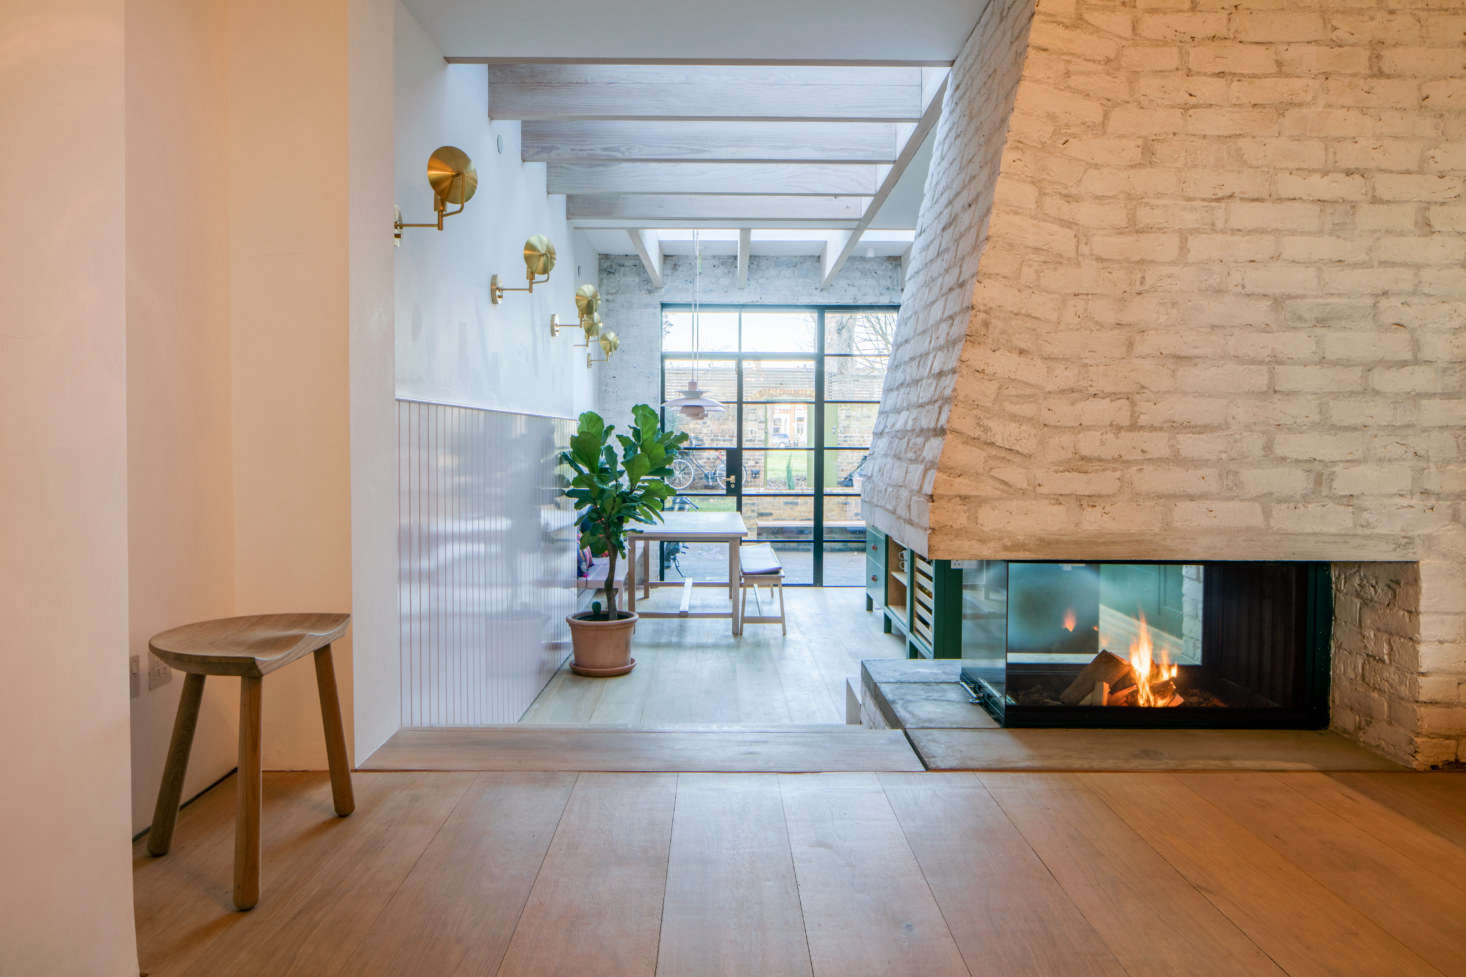 fireplace in groombridge road project by mike tuck, photo by luke hayes 4